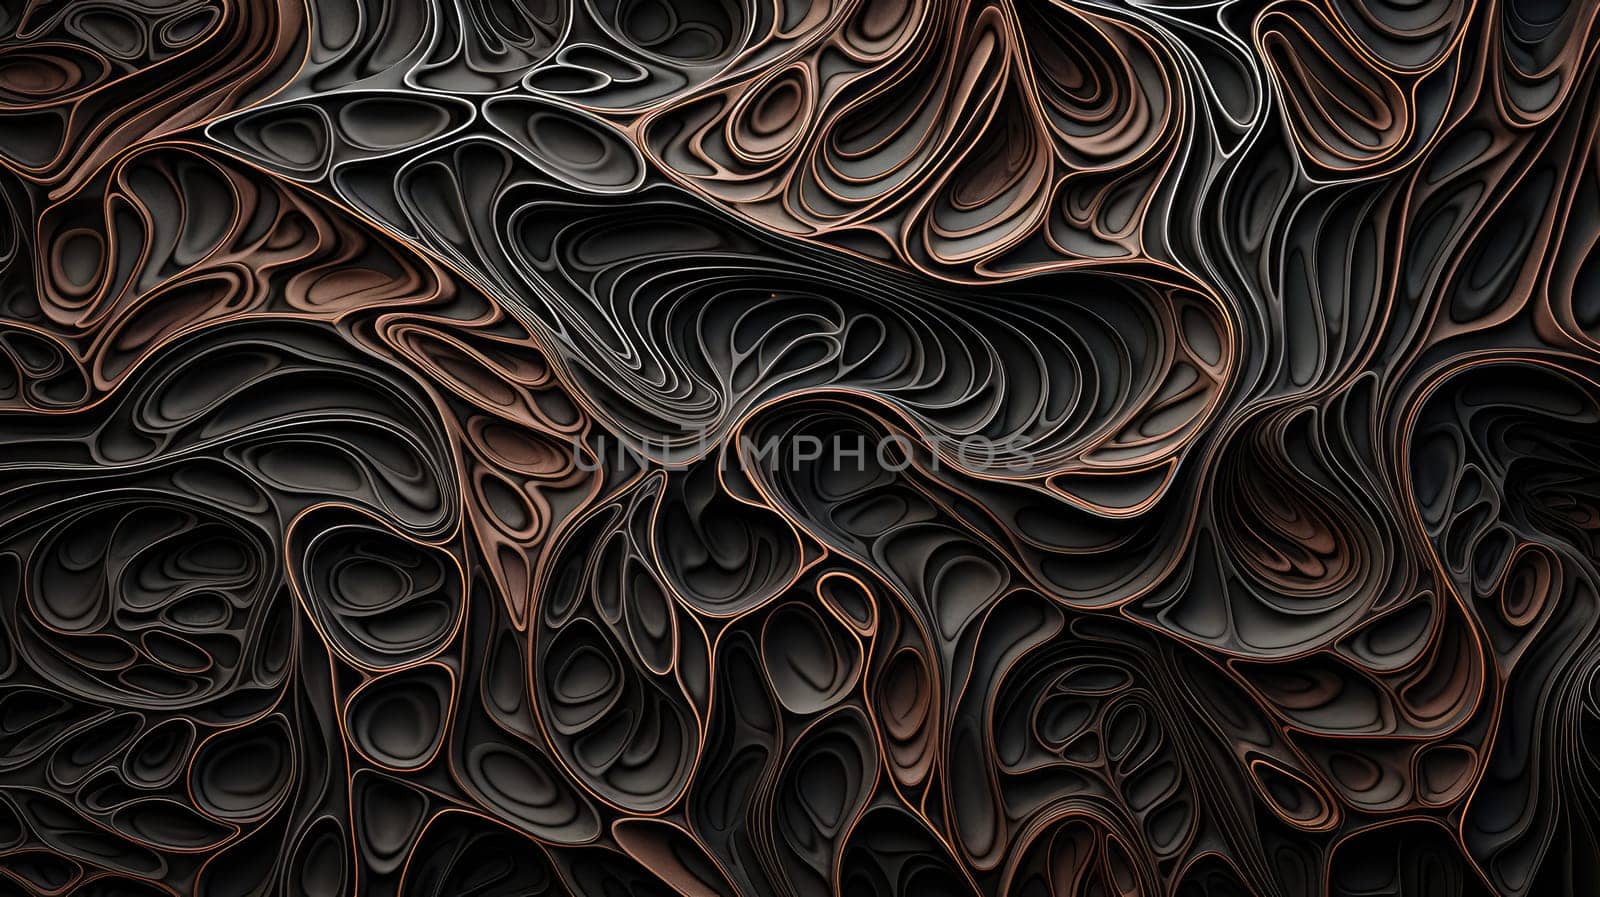 Abstract textured background with neural pattern. Graphic design element. Backdrop template